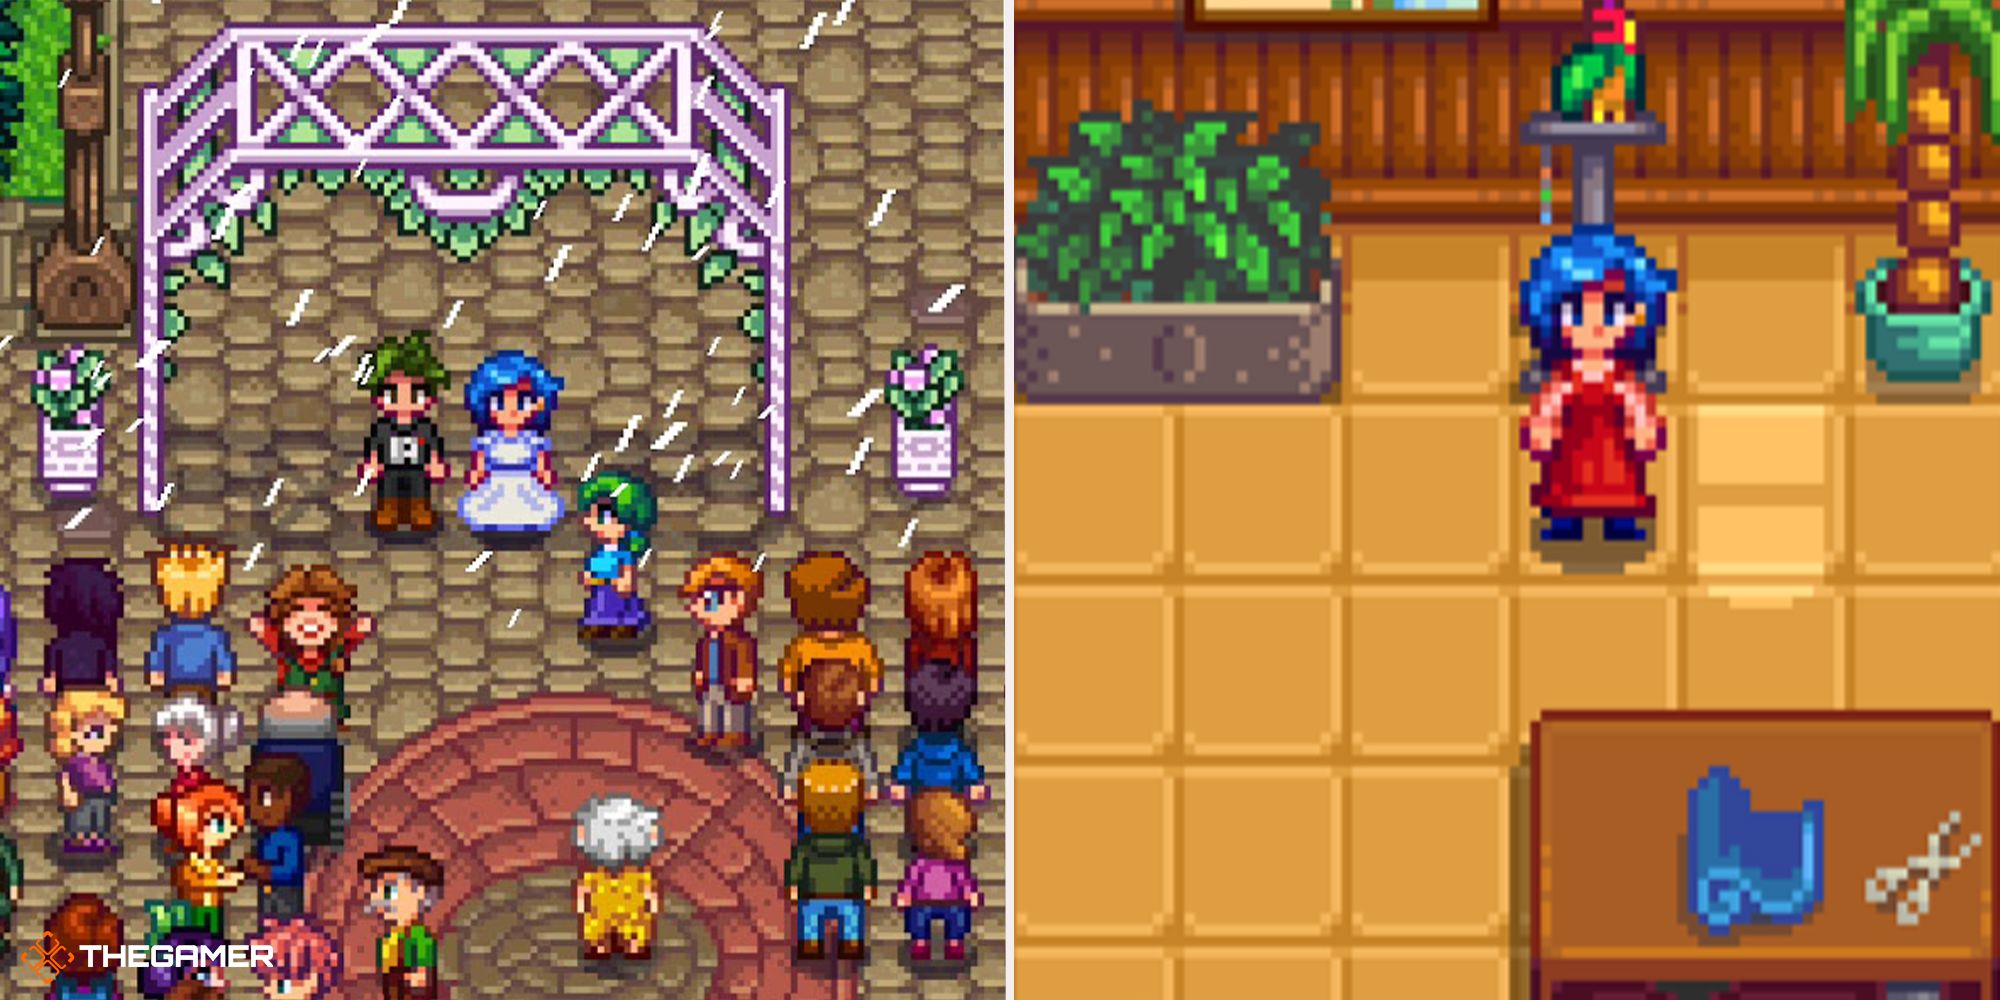 Stardew Valley - Emily wedding (left), spouse room (right)